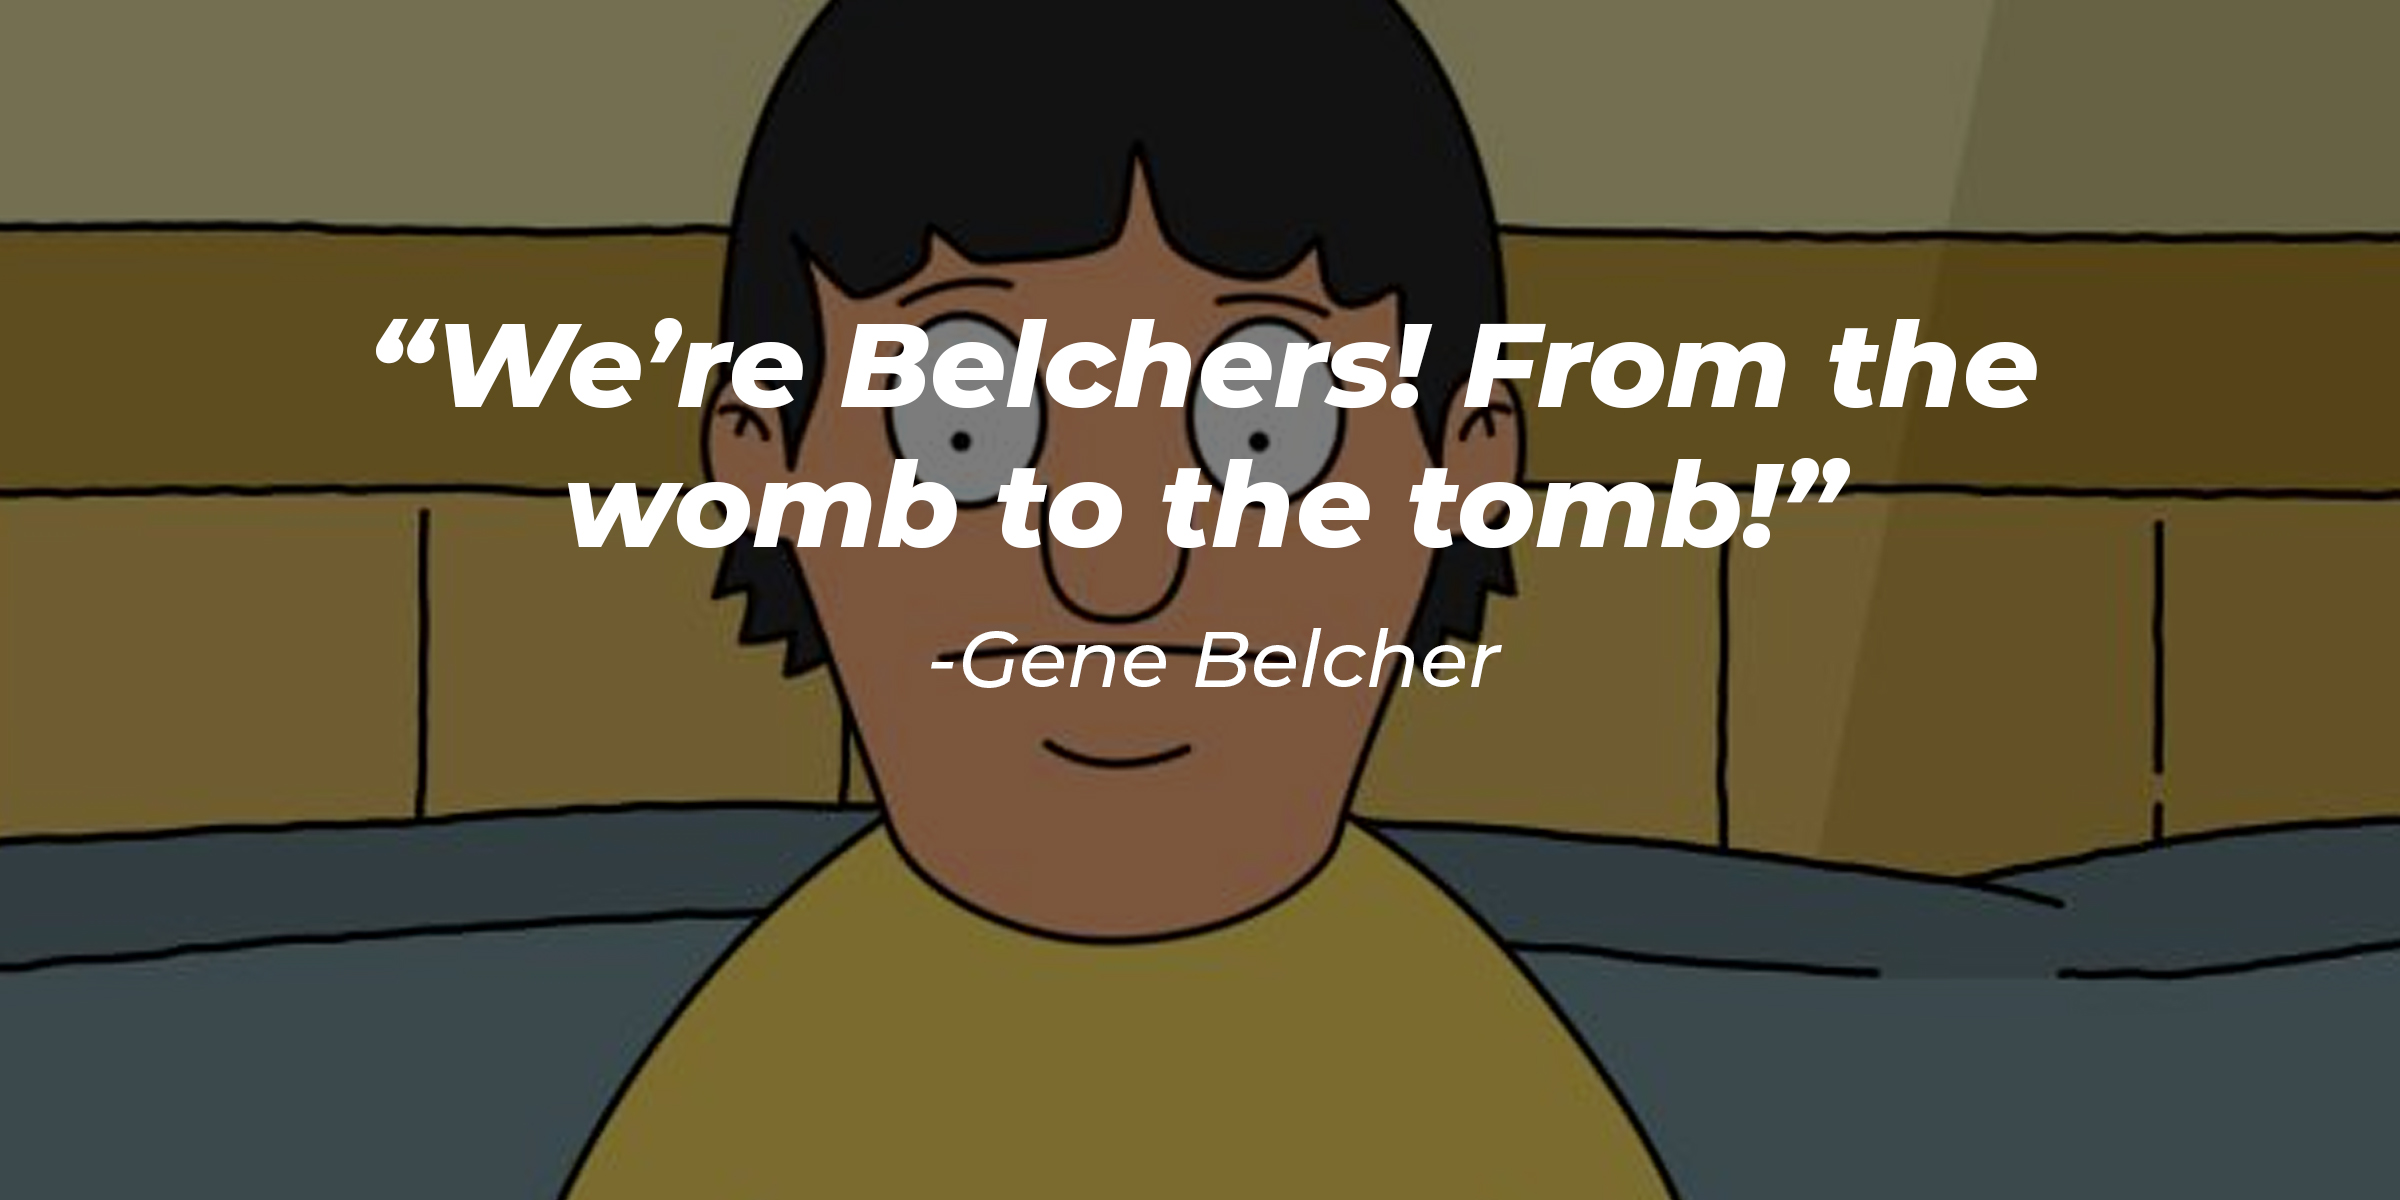 An image of Gene Belcher, with his quote: “We’re Belchers! From the womb to the tomb!” | Source: Facebook.com/BobsBurgers